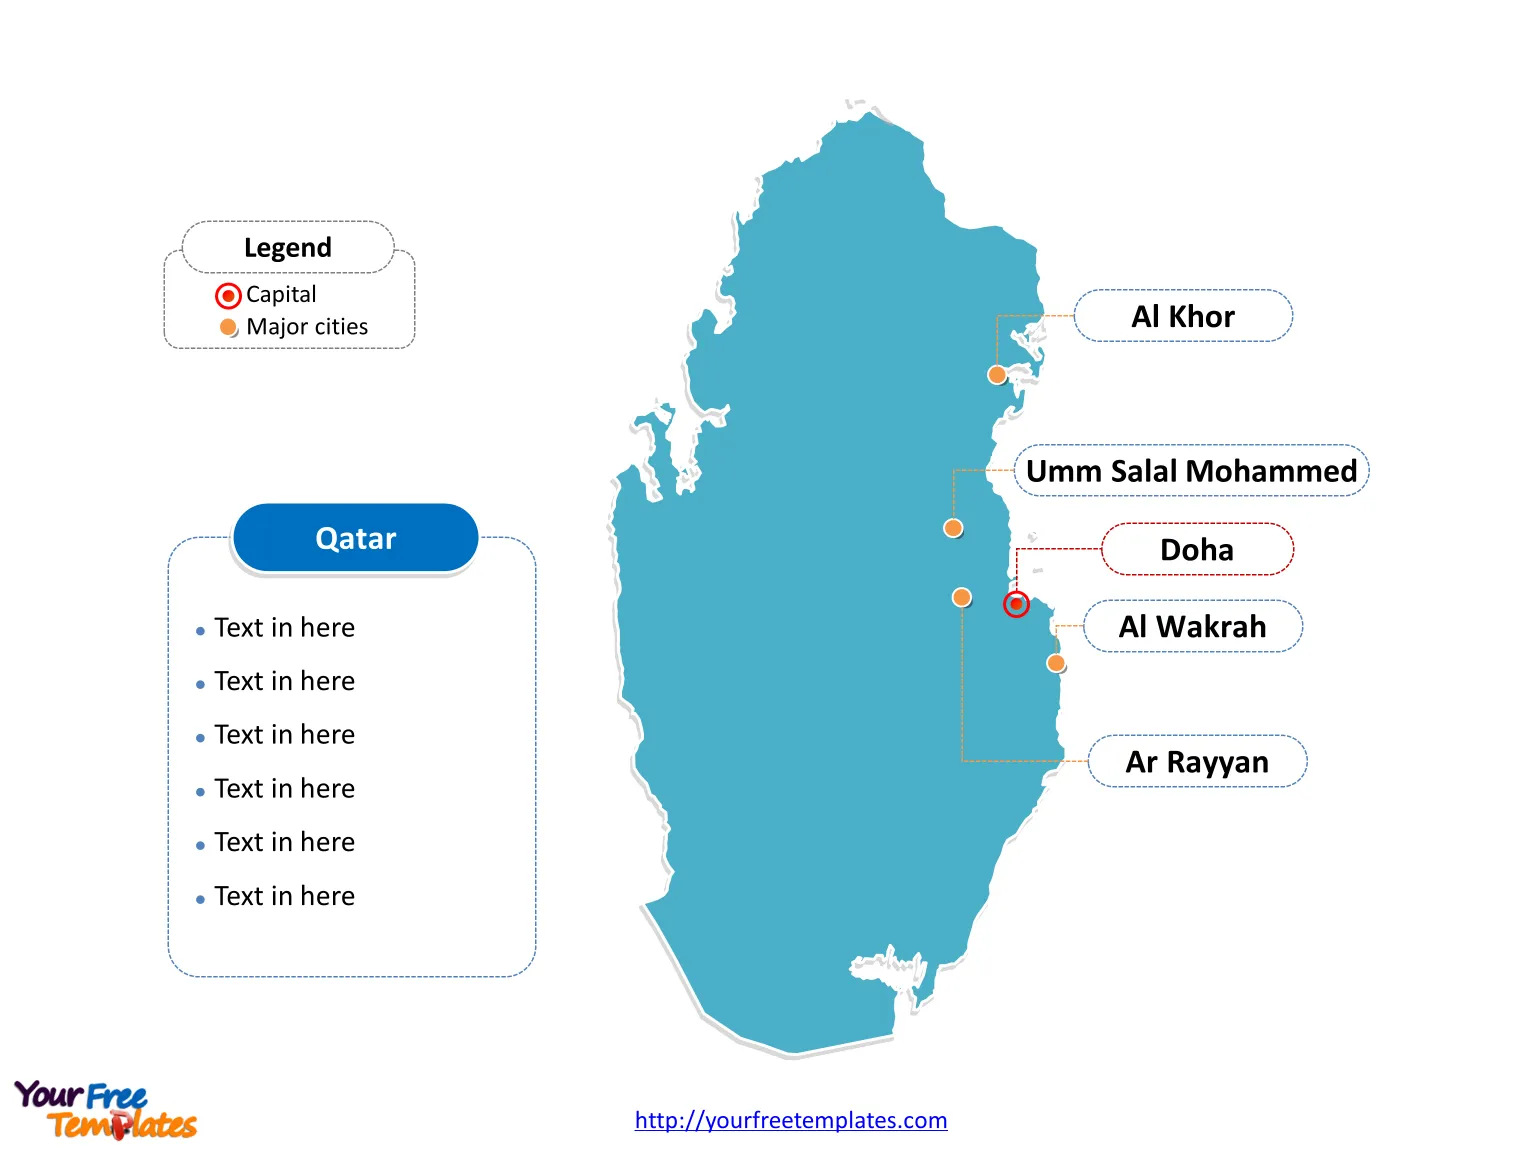 Qatar Outline map labeled with cities